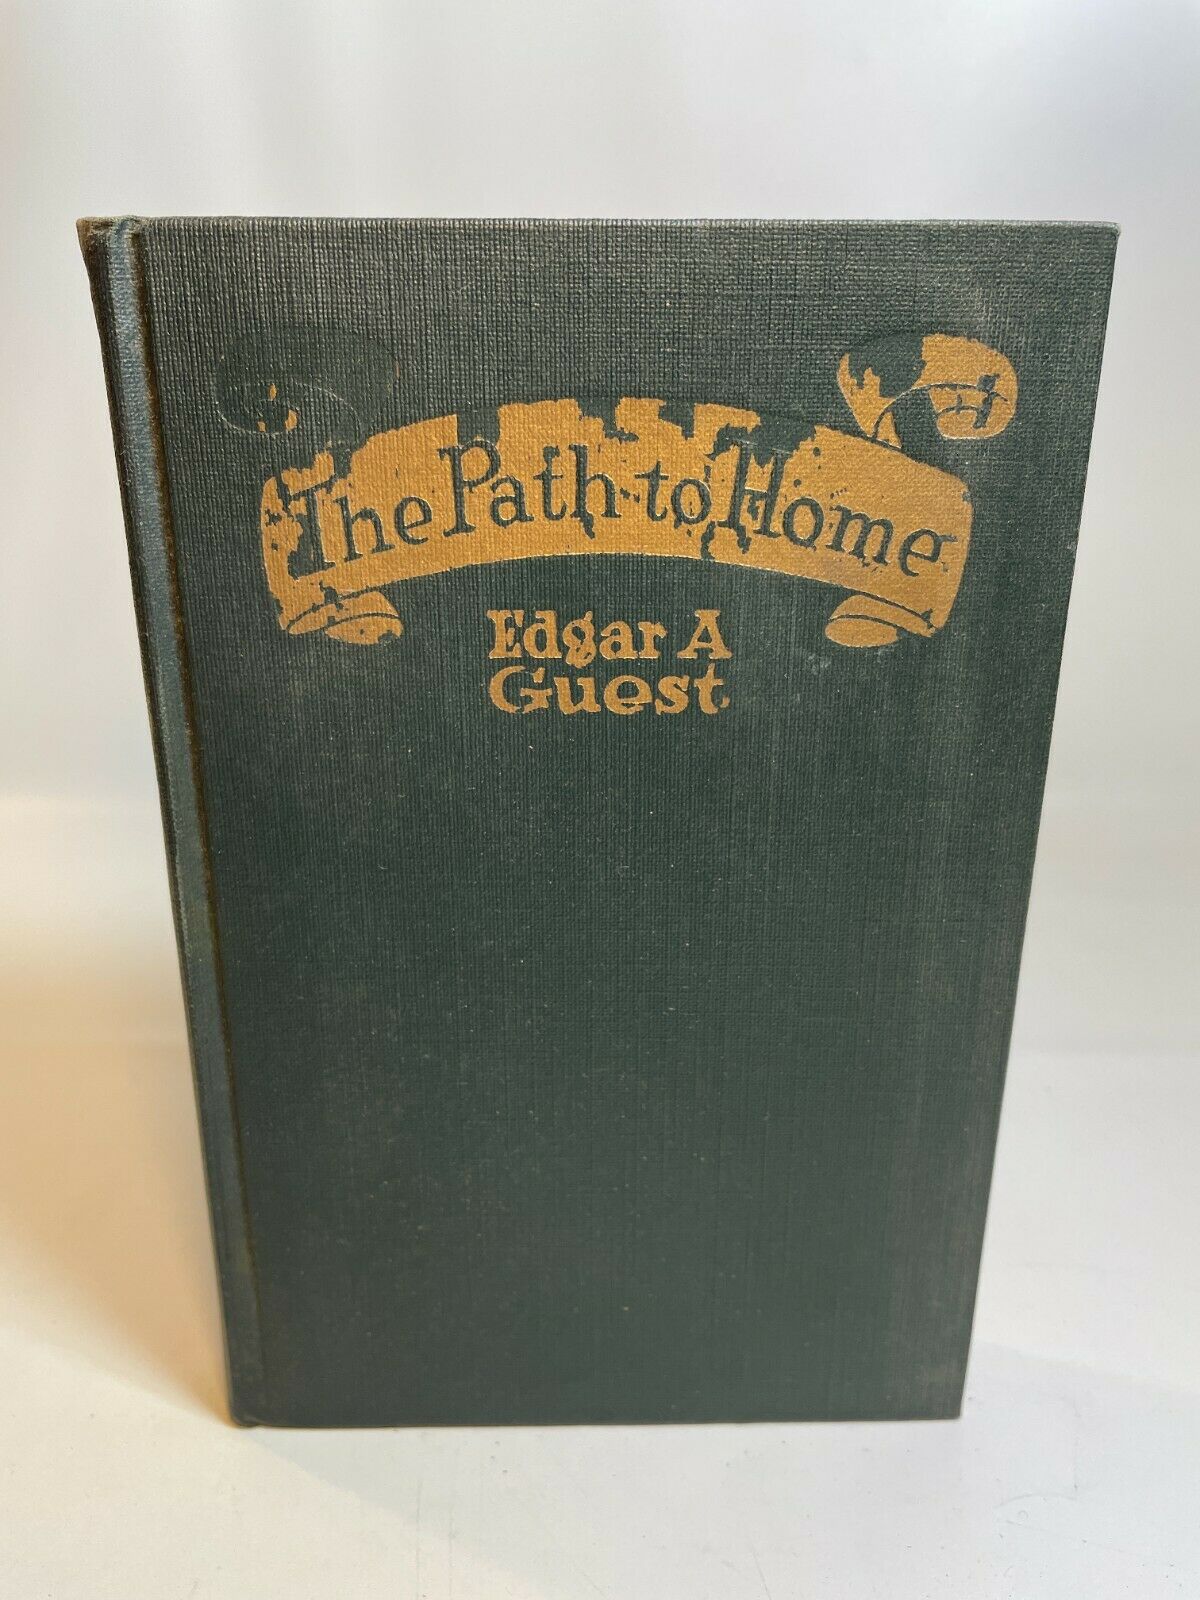 The Path to Home by Edgar A Guest [1919]